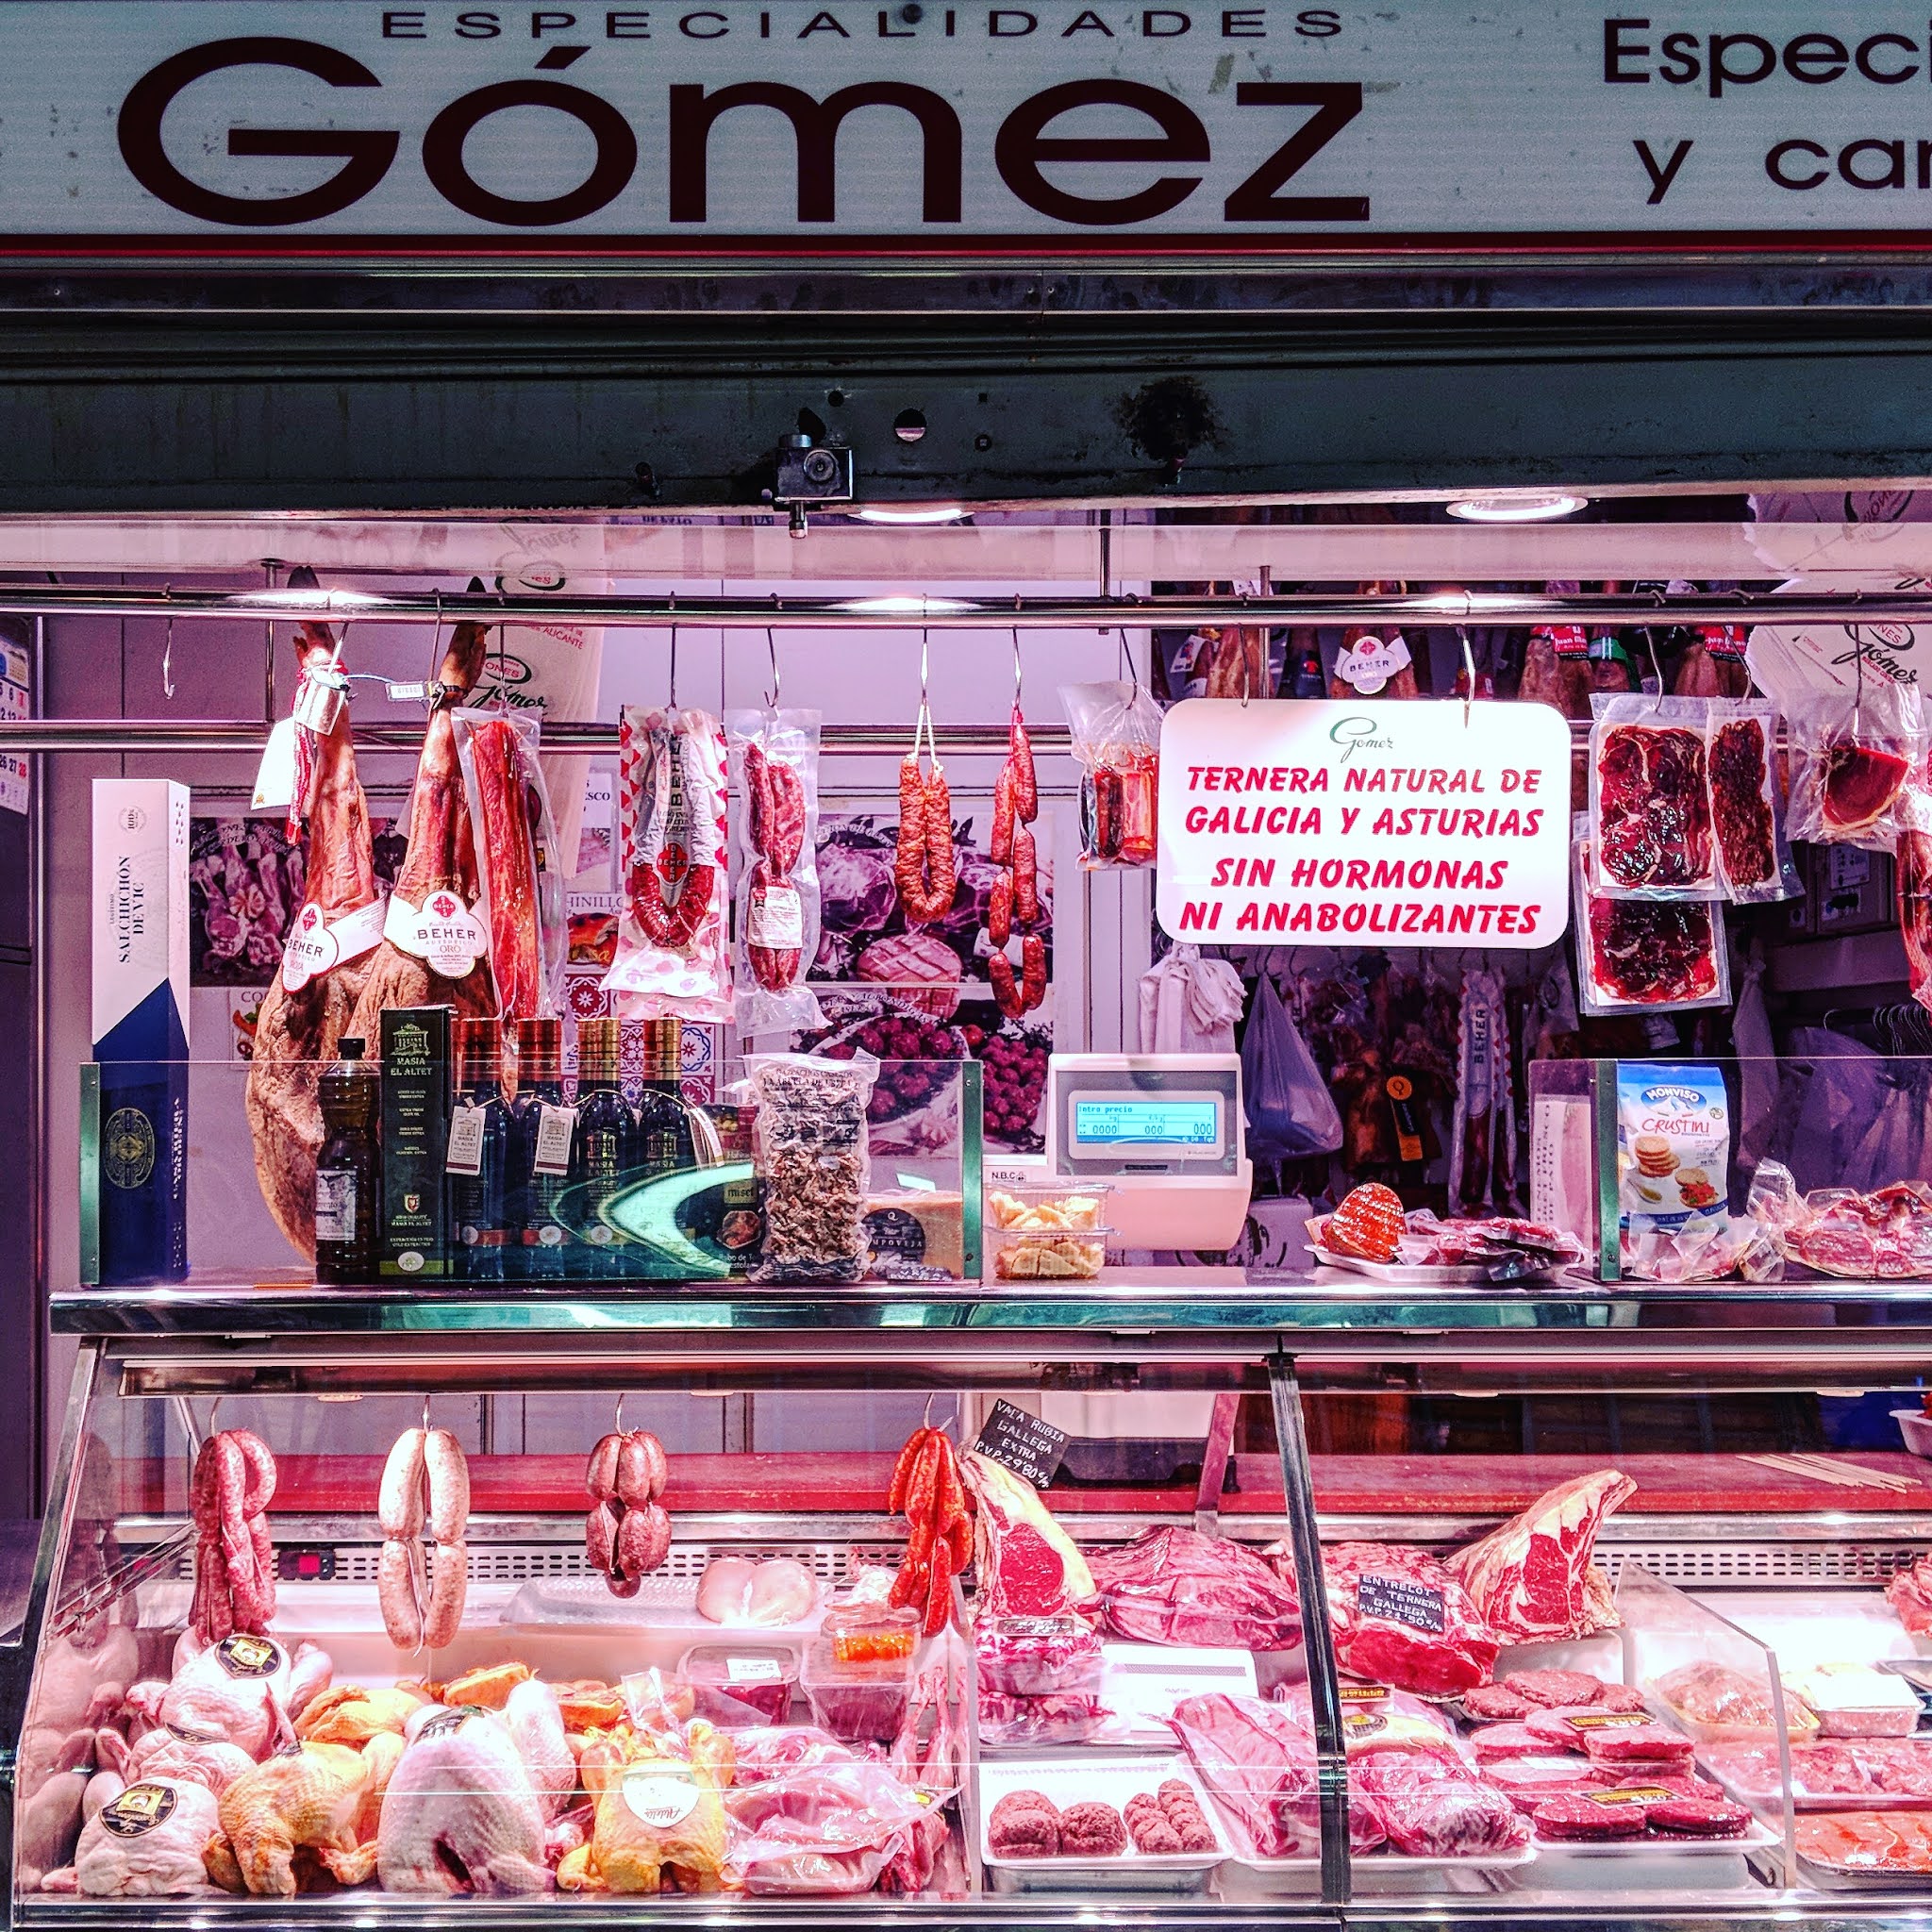 counter full of meat at the central market in alicante